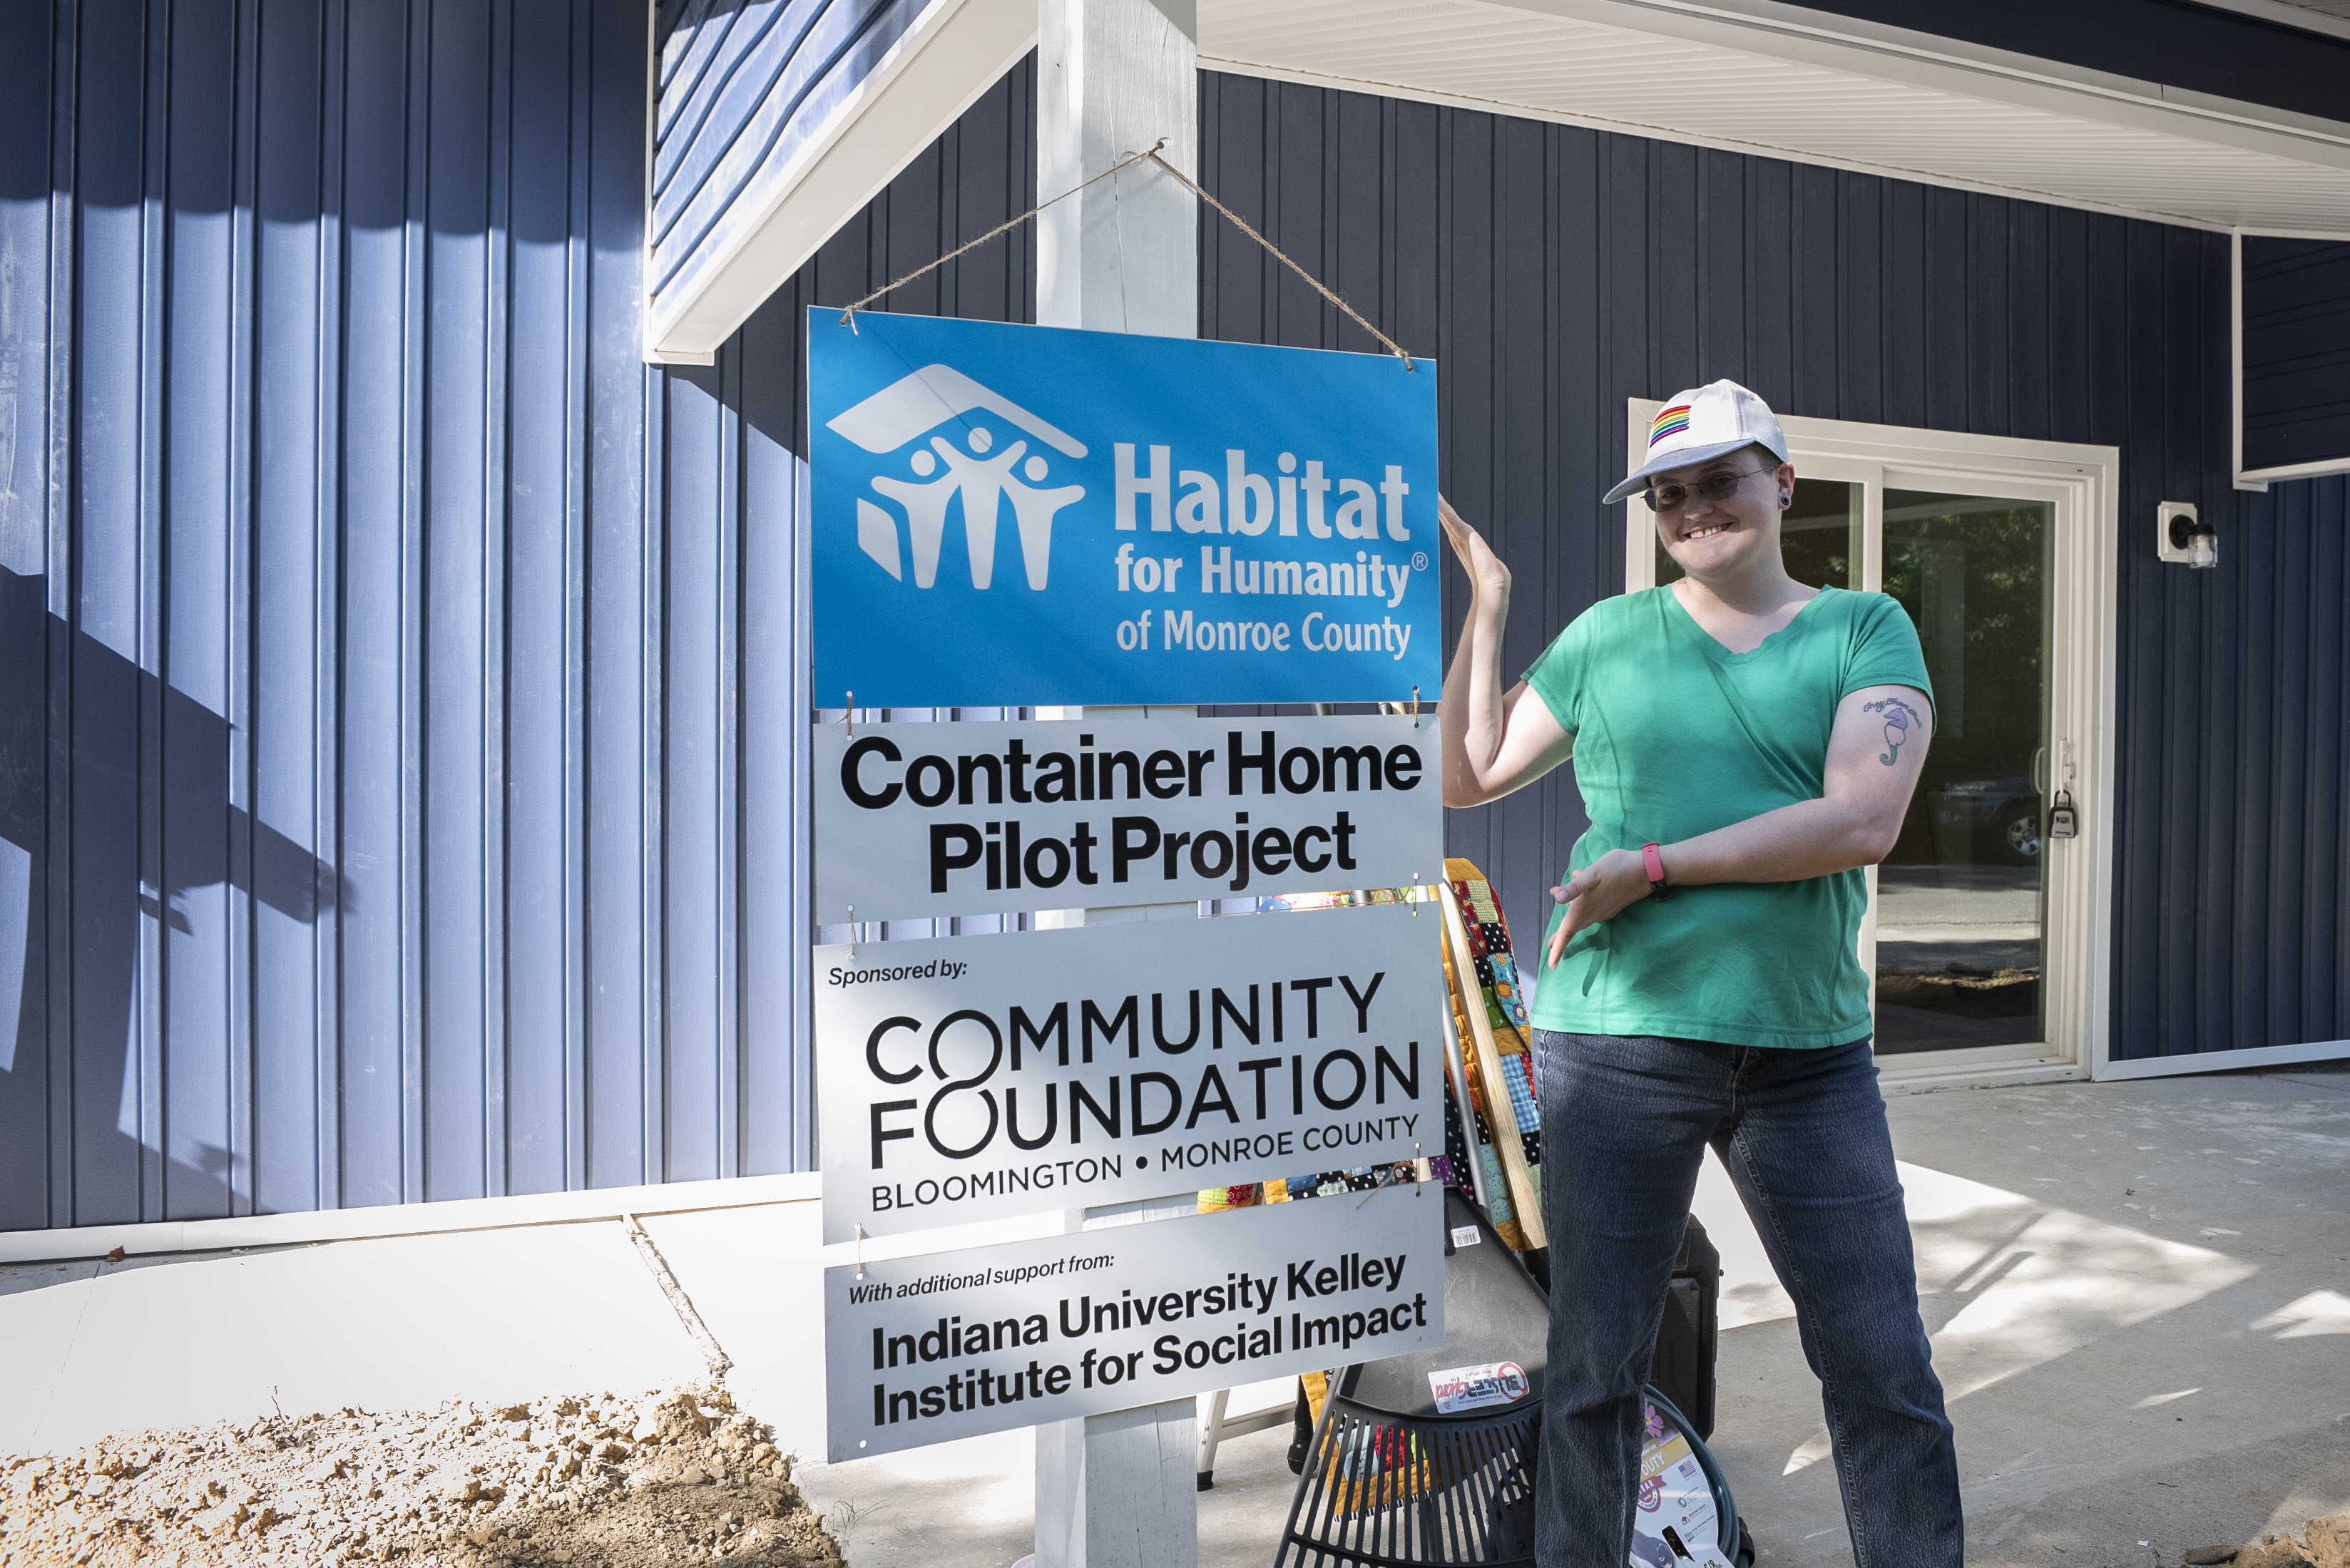 Charlie Lynne, homeowner of the first Habitat container home